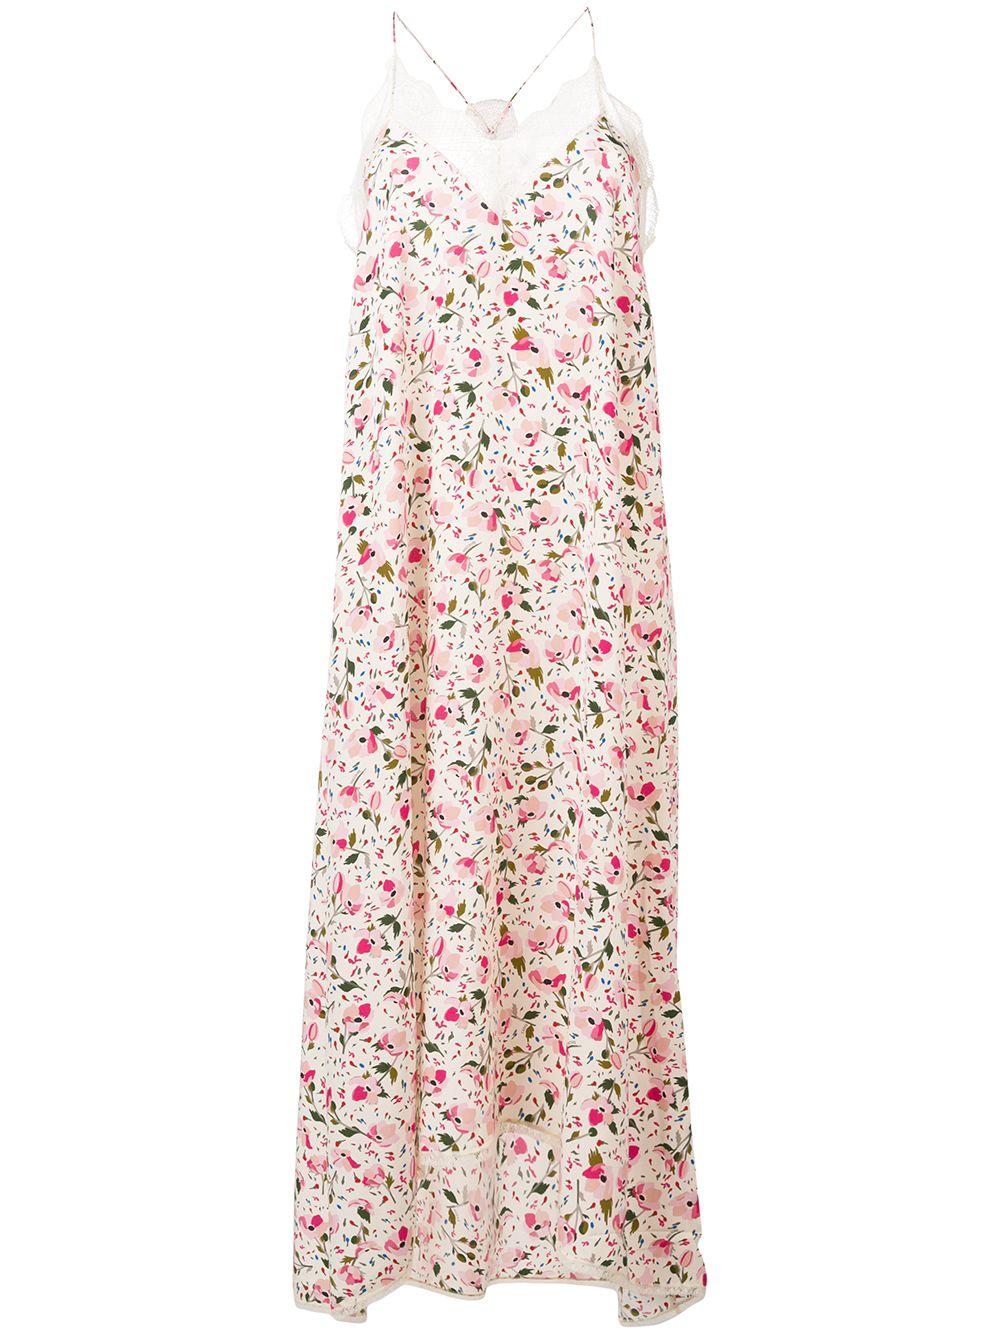 Zadig & Voltaire Silk Fashion Show Risty Maxi Dress in White - Lyst